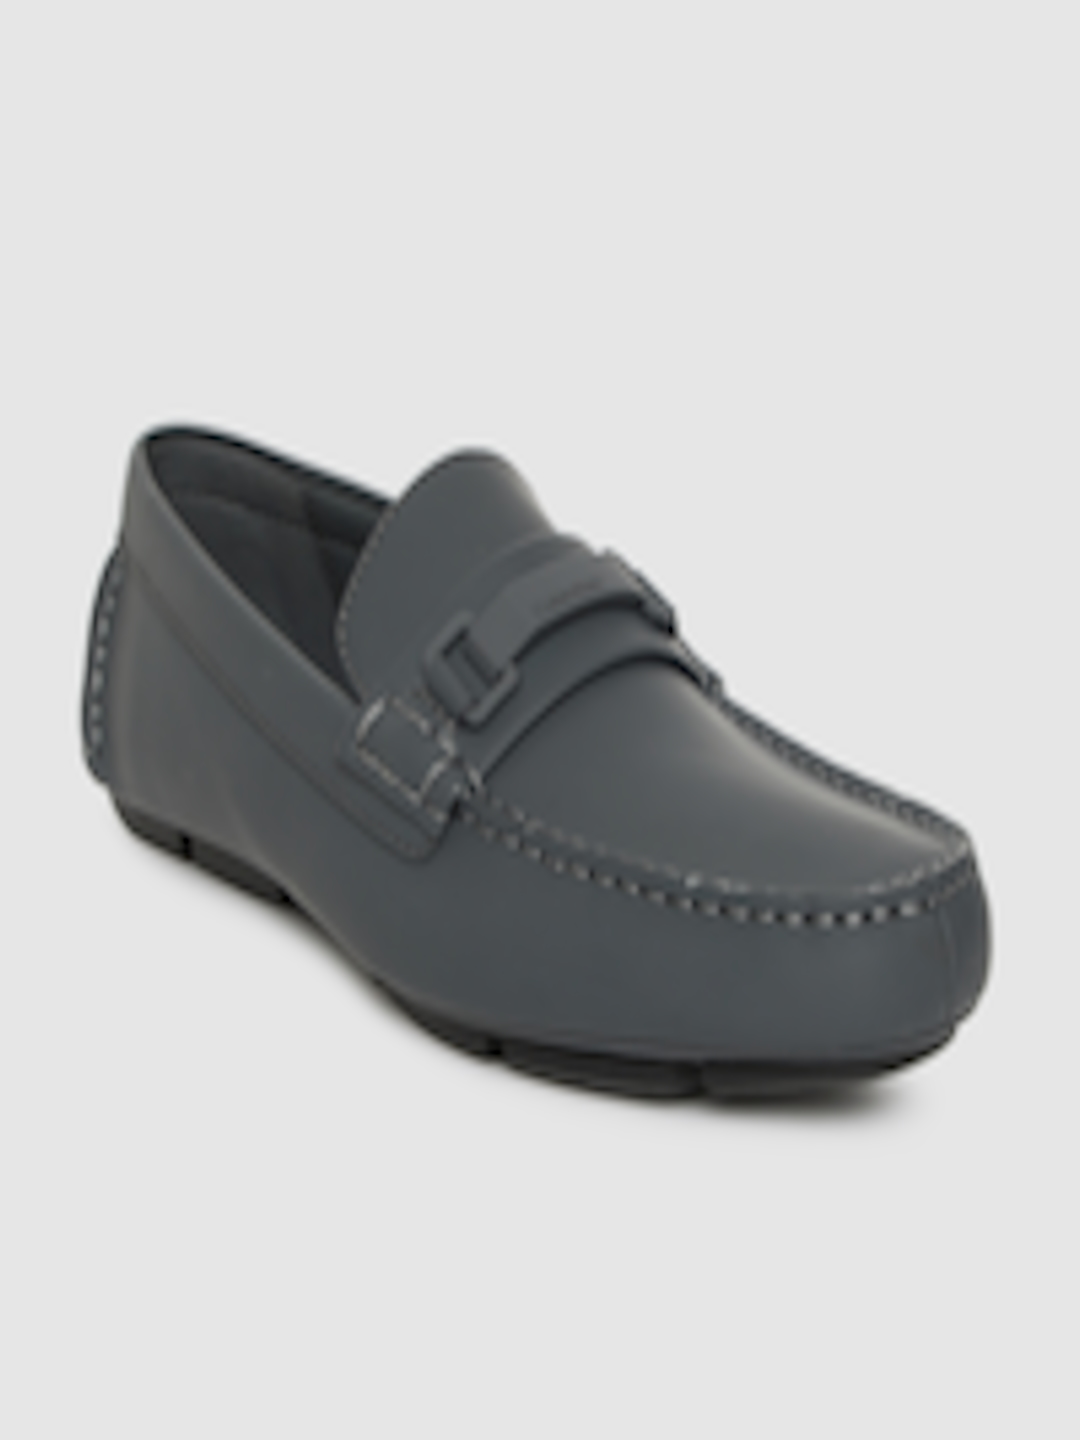 calvin klein loafers grey shoes leather